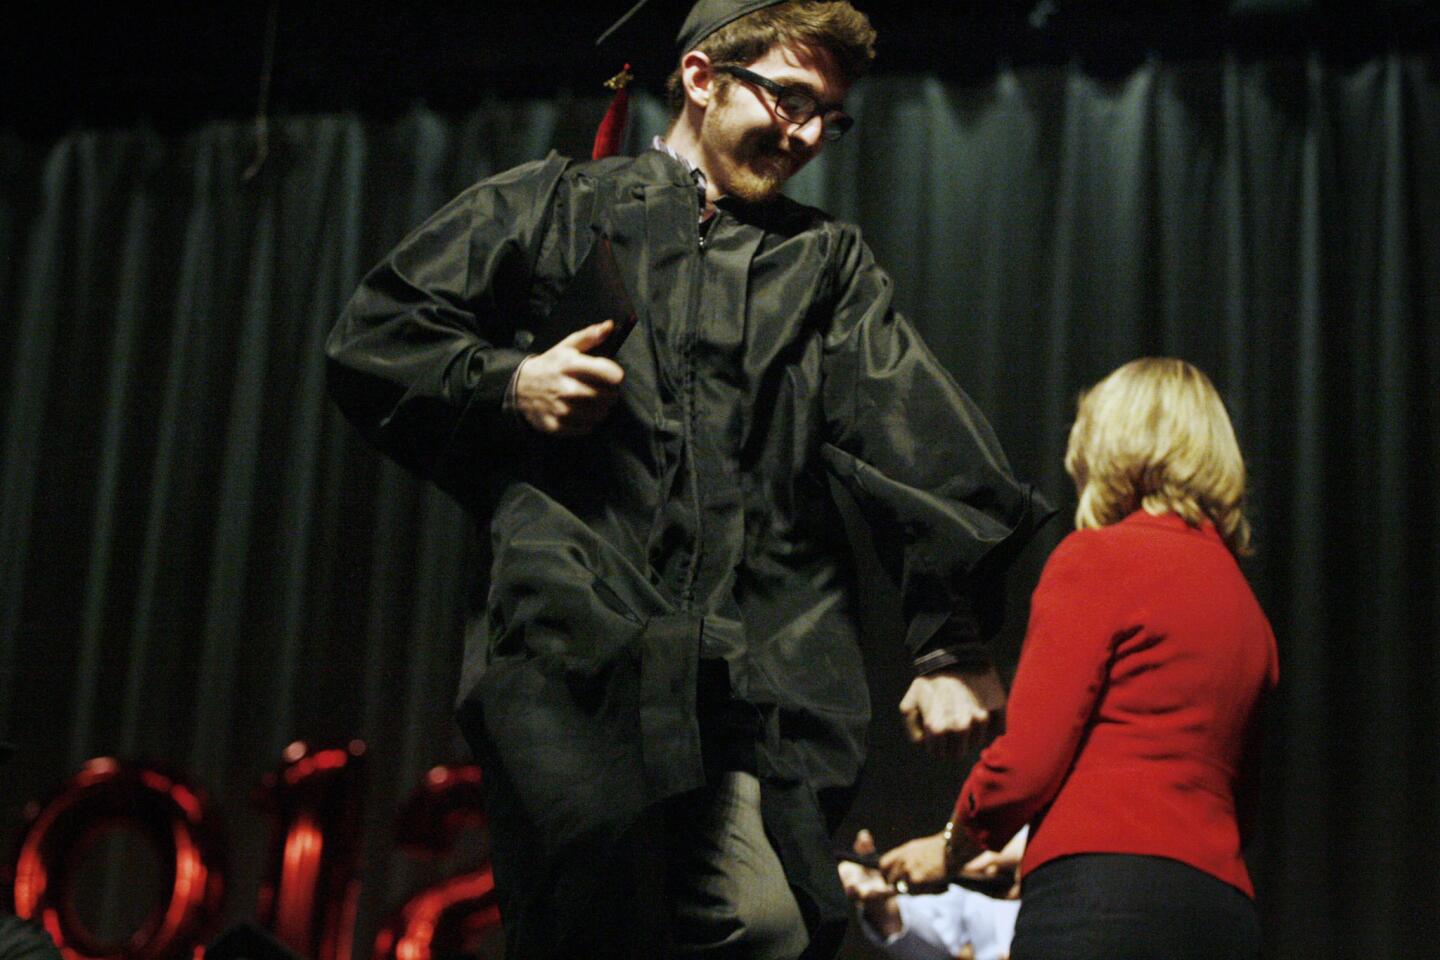 Monterey's George Tajerian, 18, dances onstage after receiving his high school diploma during his graduation ceremony, which took place at Luther Middle School in Burbank on Wednesday, June 6, 2012.